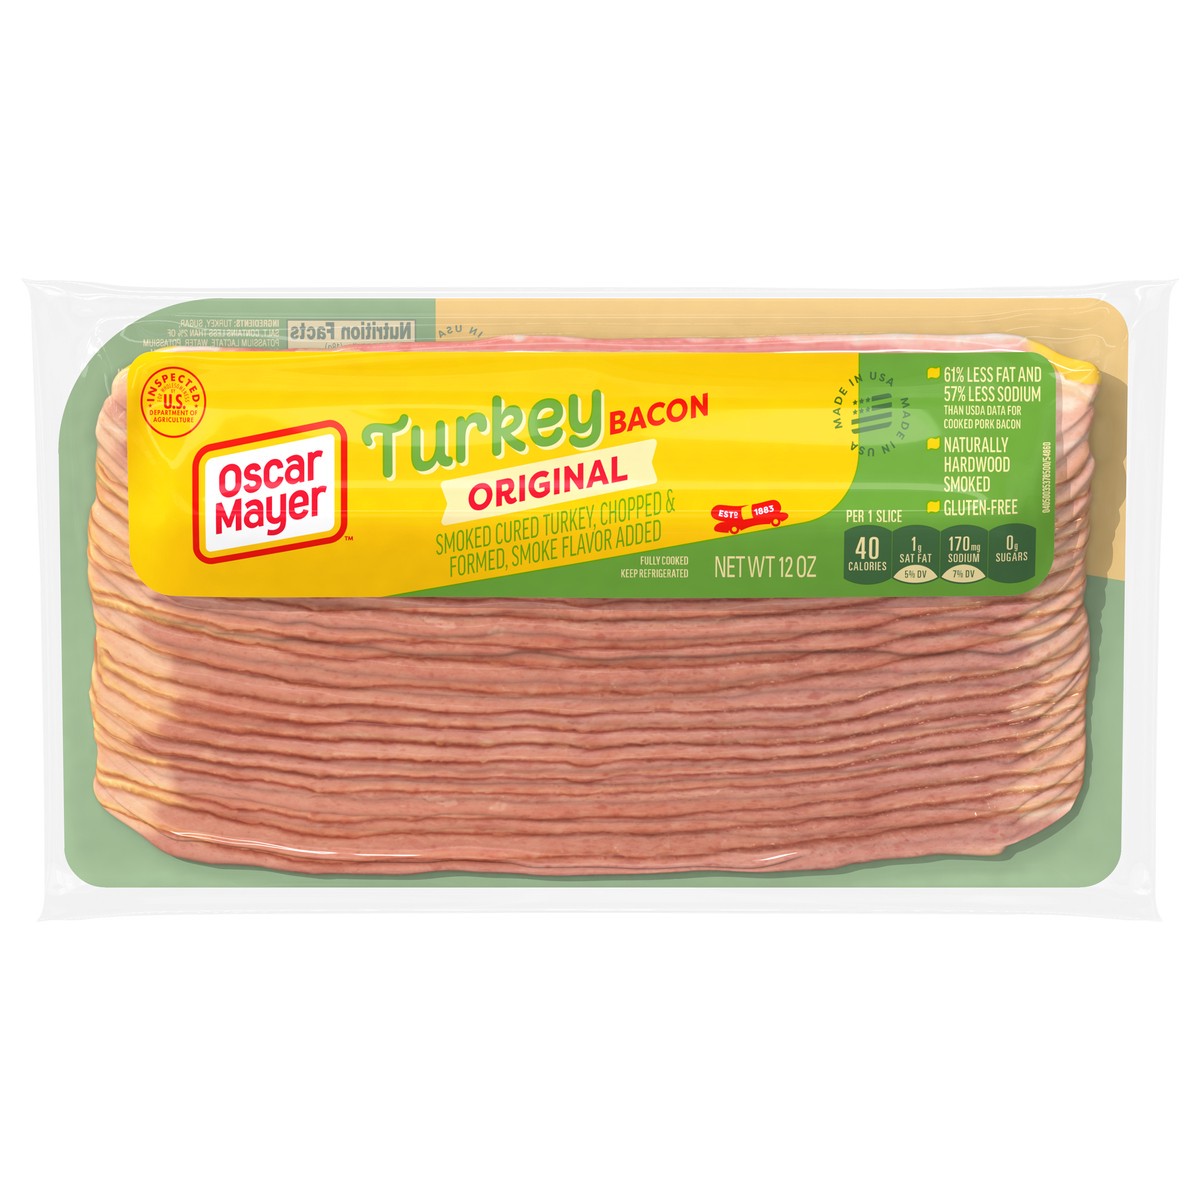 slide 1 of 9, Oscar Mayer Gluten Free Turkey Bacon with 58% Less Fat & 57% Less Sodium, 12 oz Pack, 21-23 slices, 12 oz